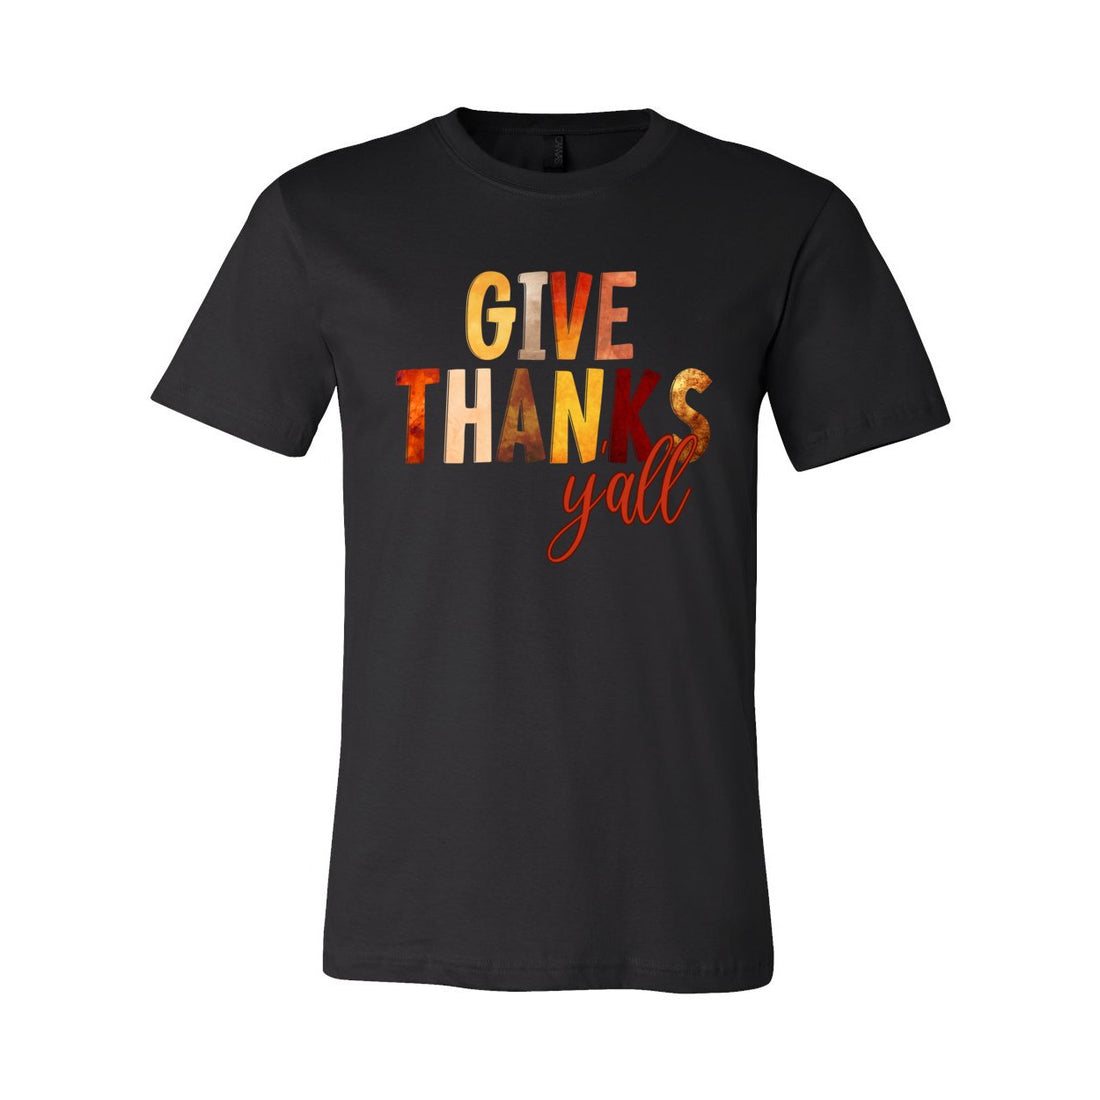 Give Thanks Y'all Short Sleeve Jersey Tee - T-Shirts - Positively Sassy - Give Thanks Y'all Short Sleeve Jersey Tee